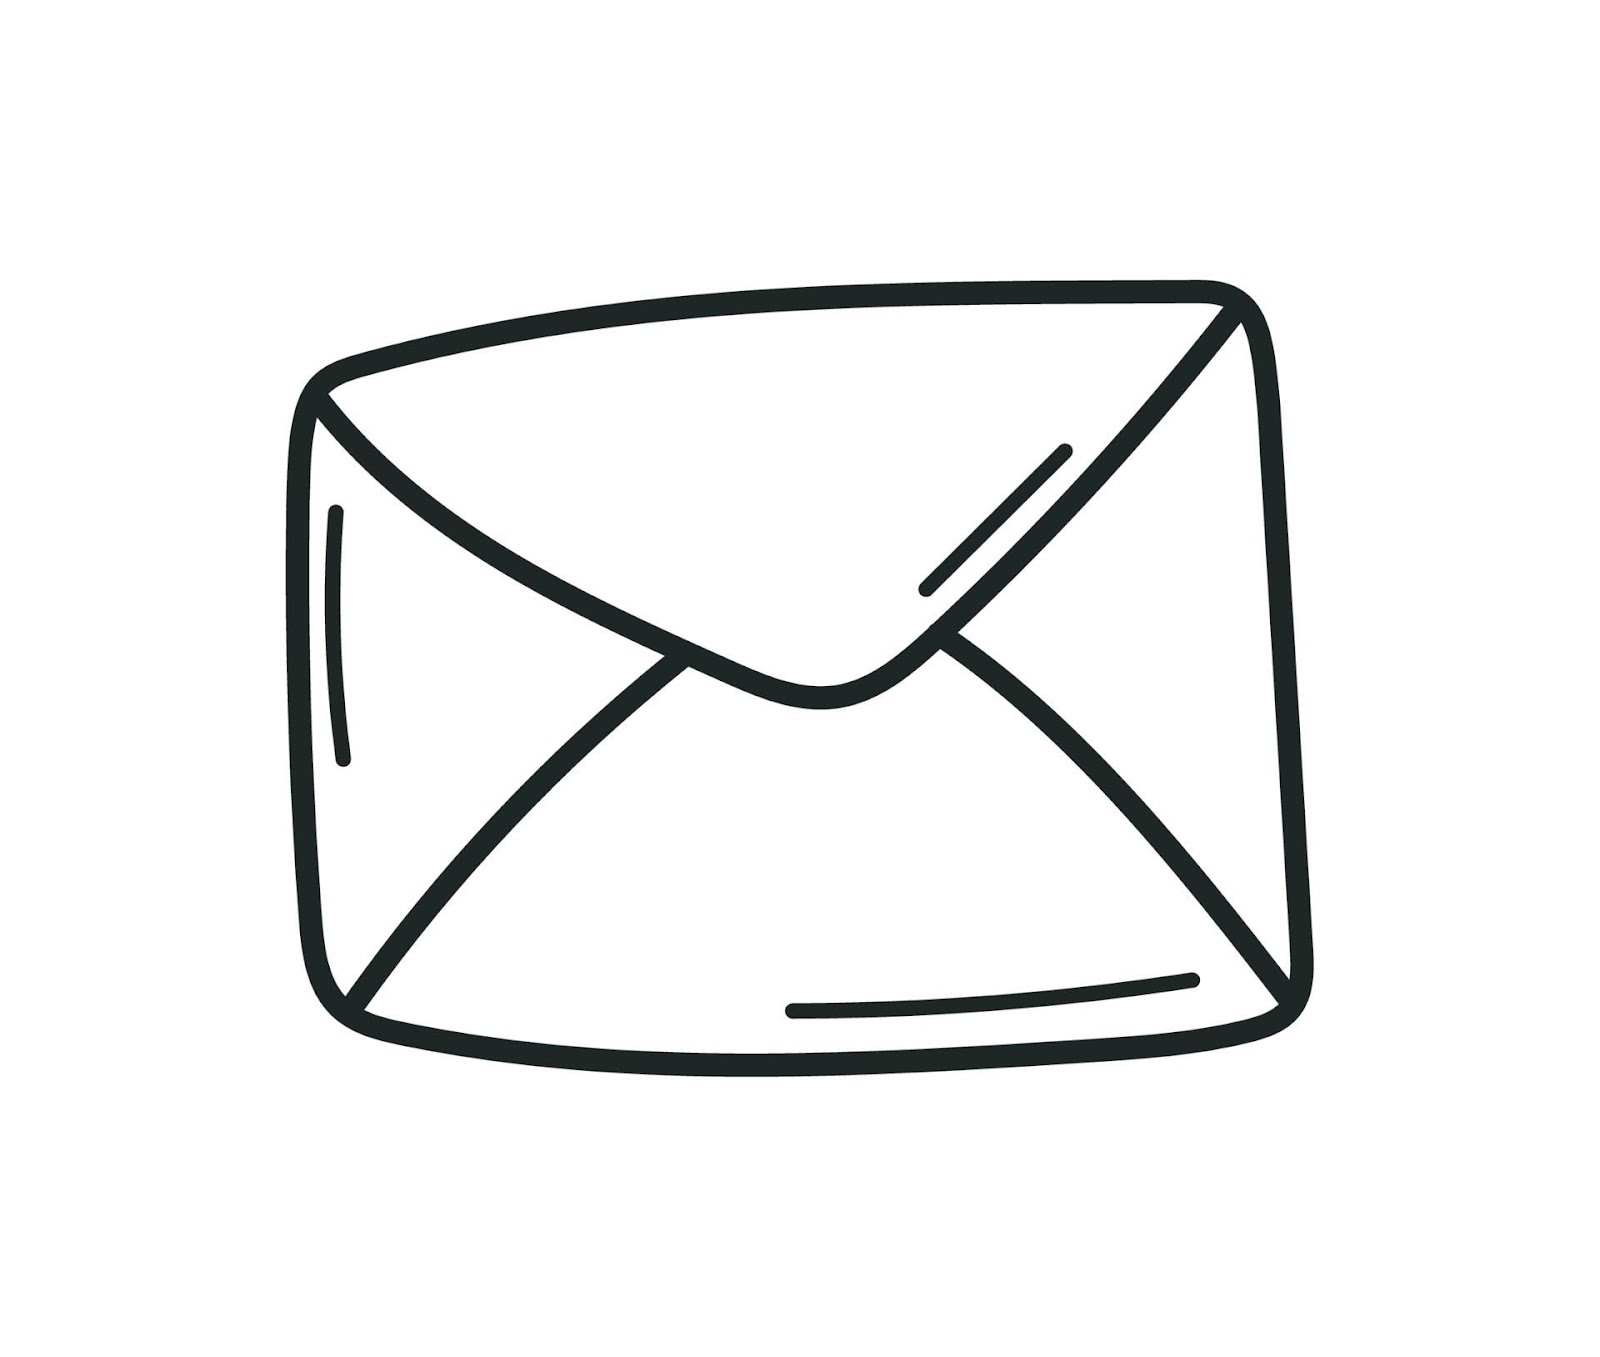 email-doodle-icon-free-vector.jpg